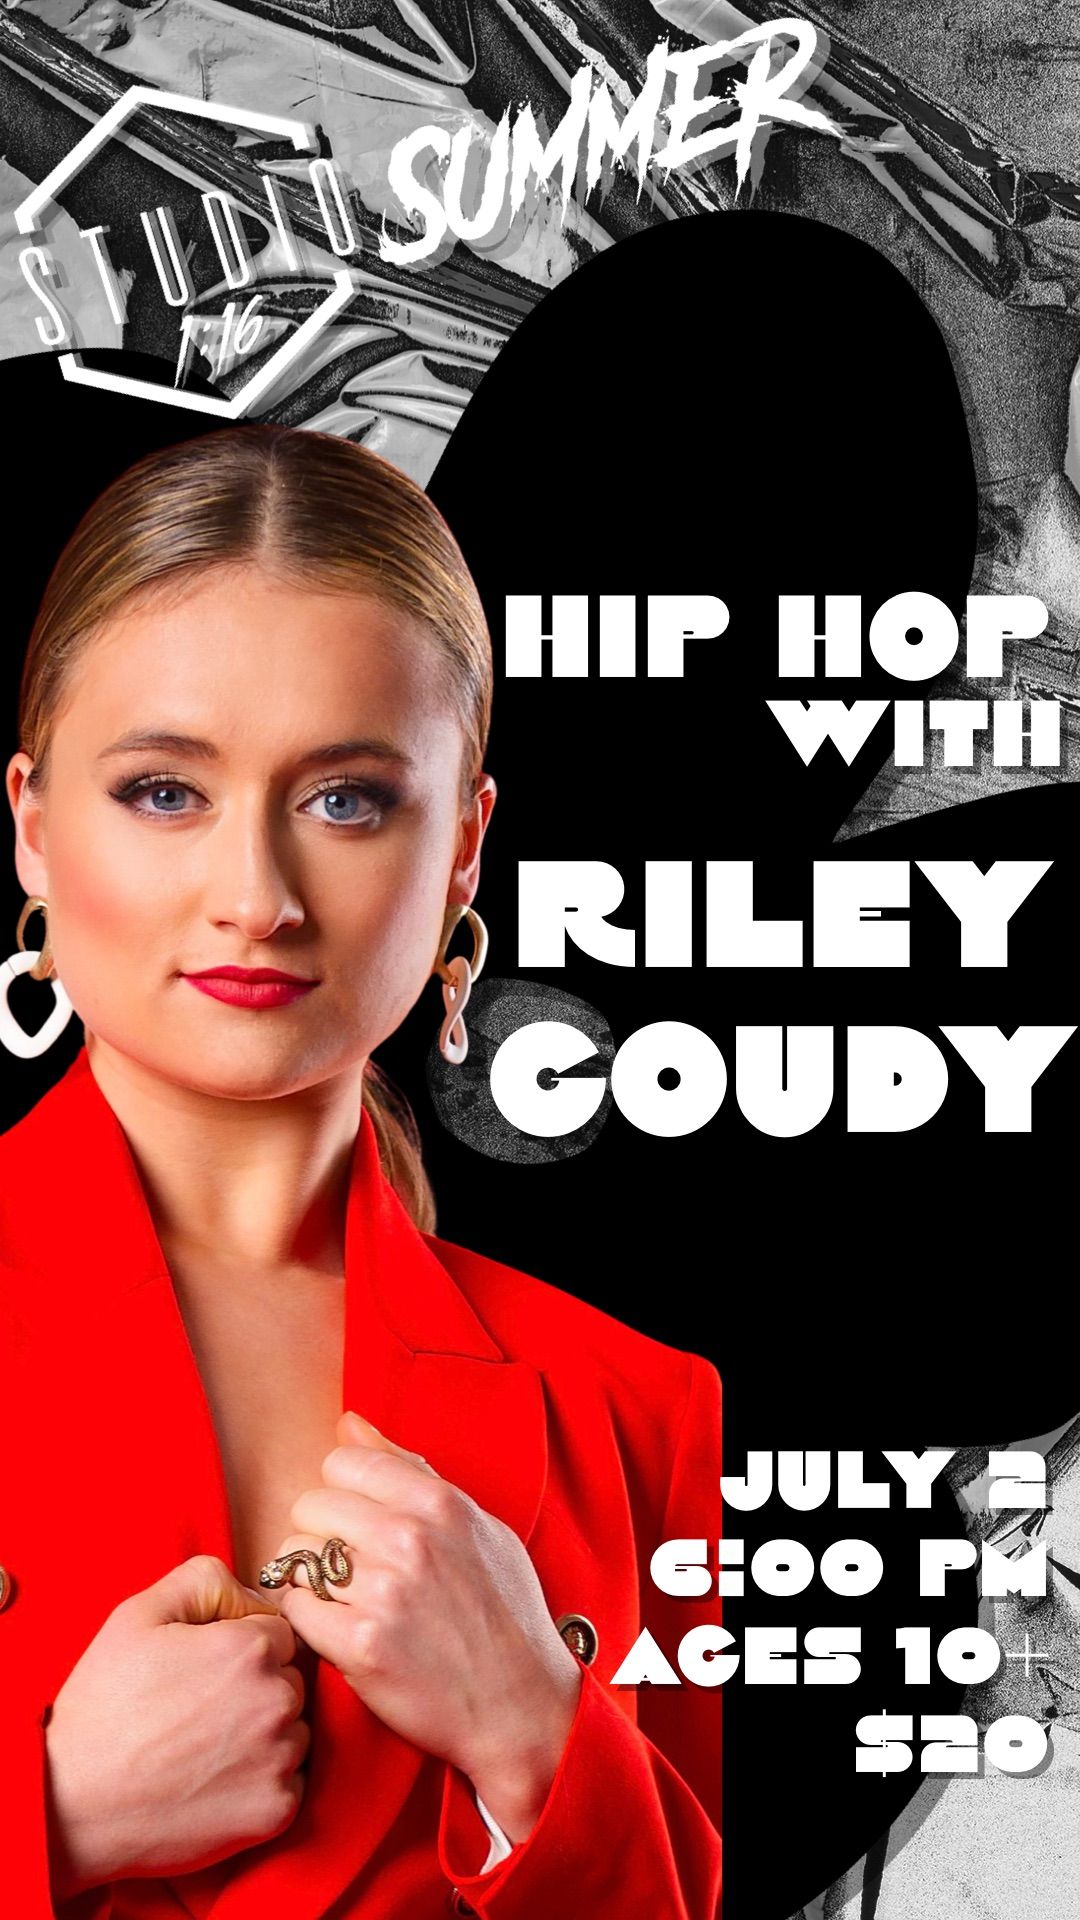 HIP HOP OPEN CLASS with Riley Goudy